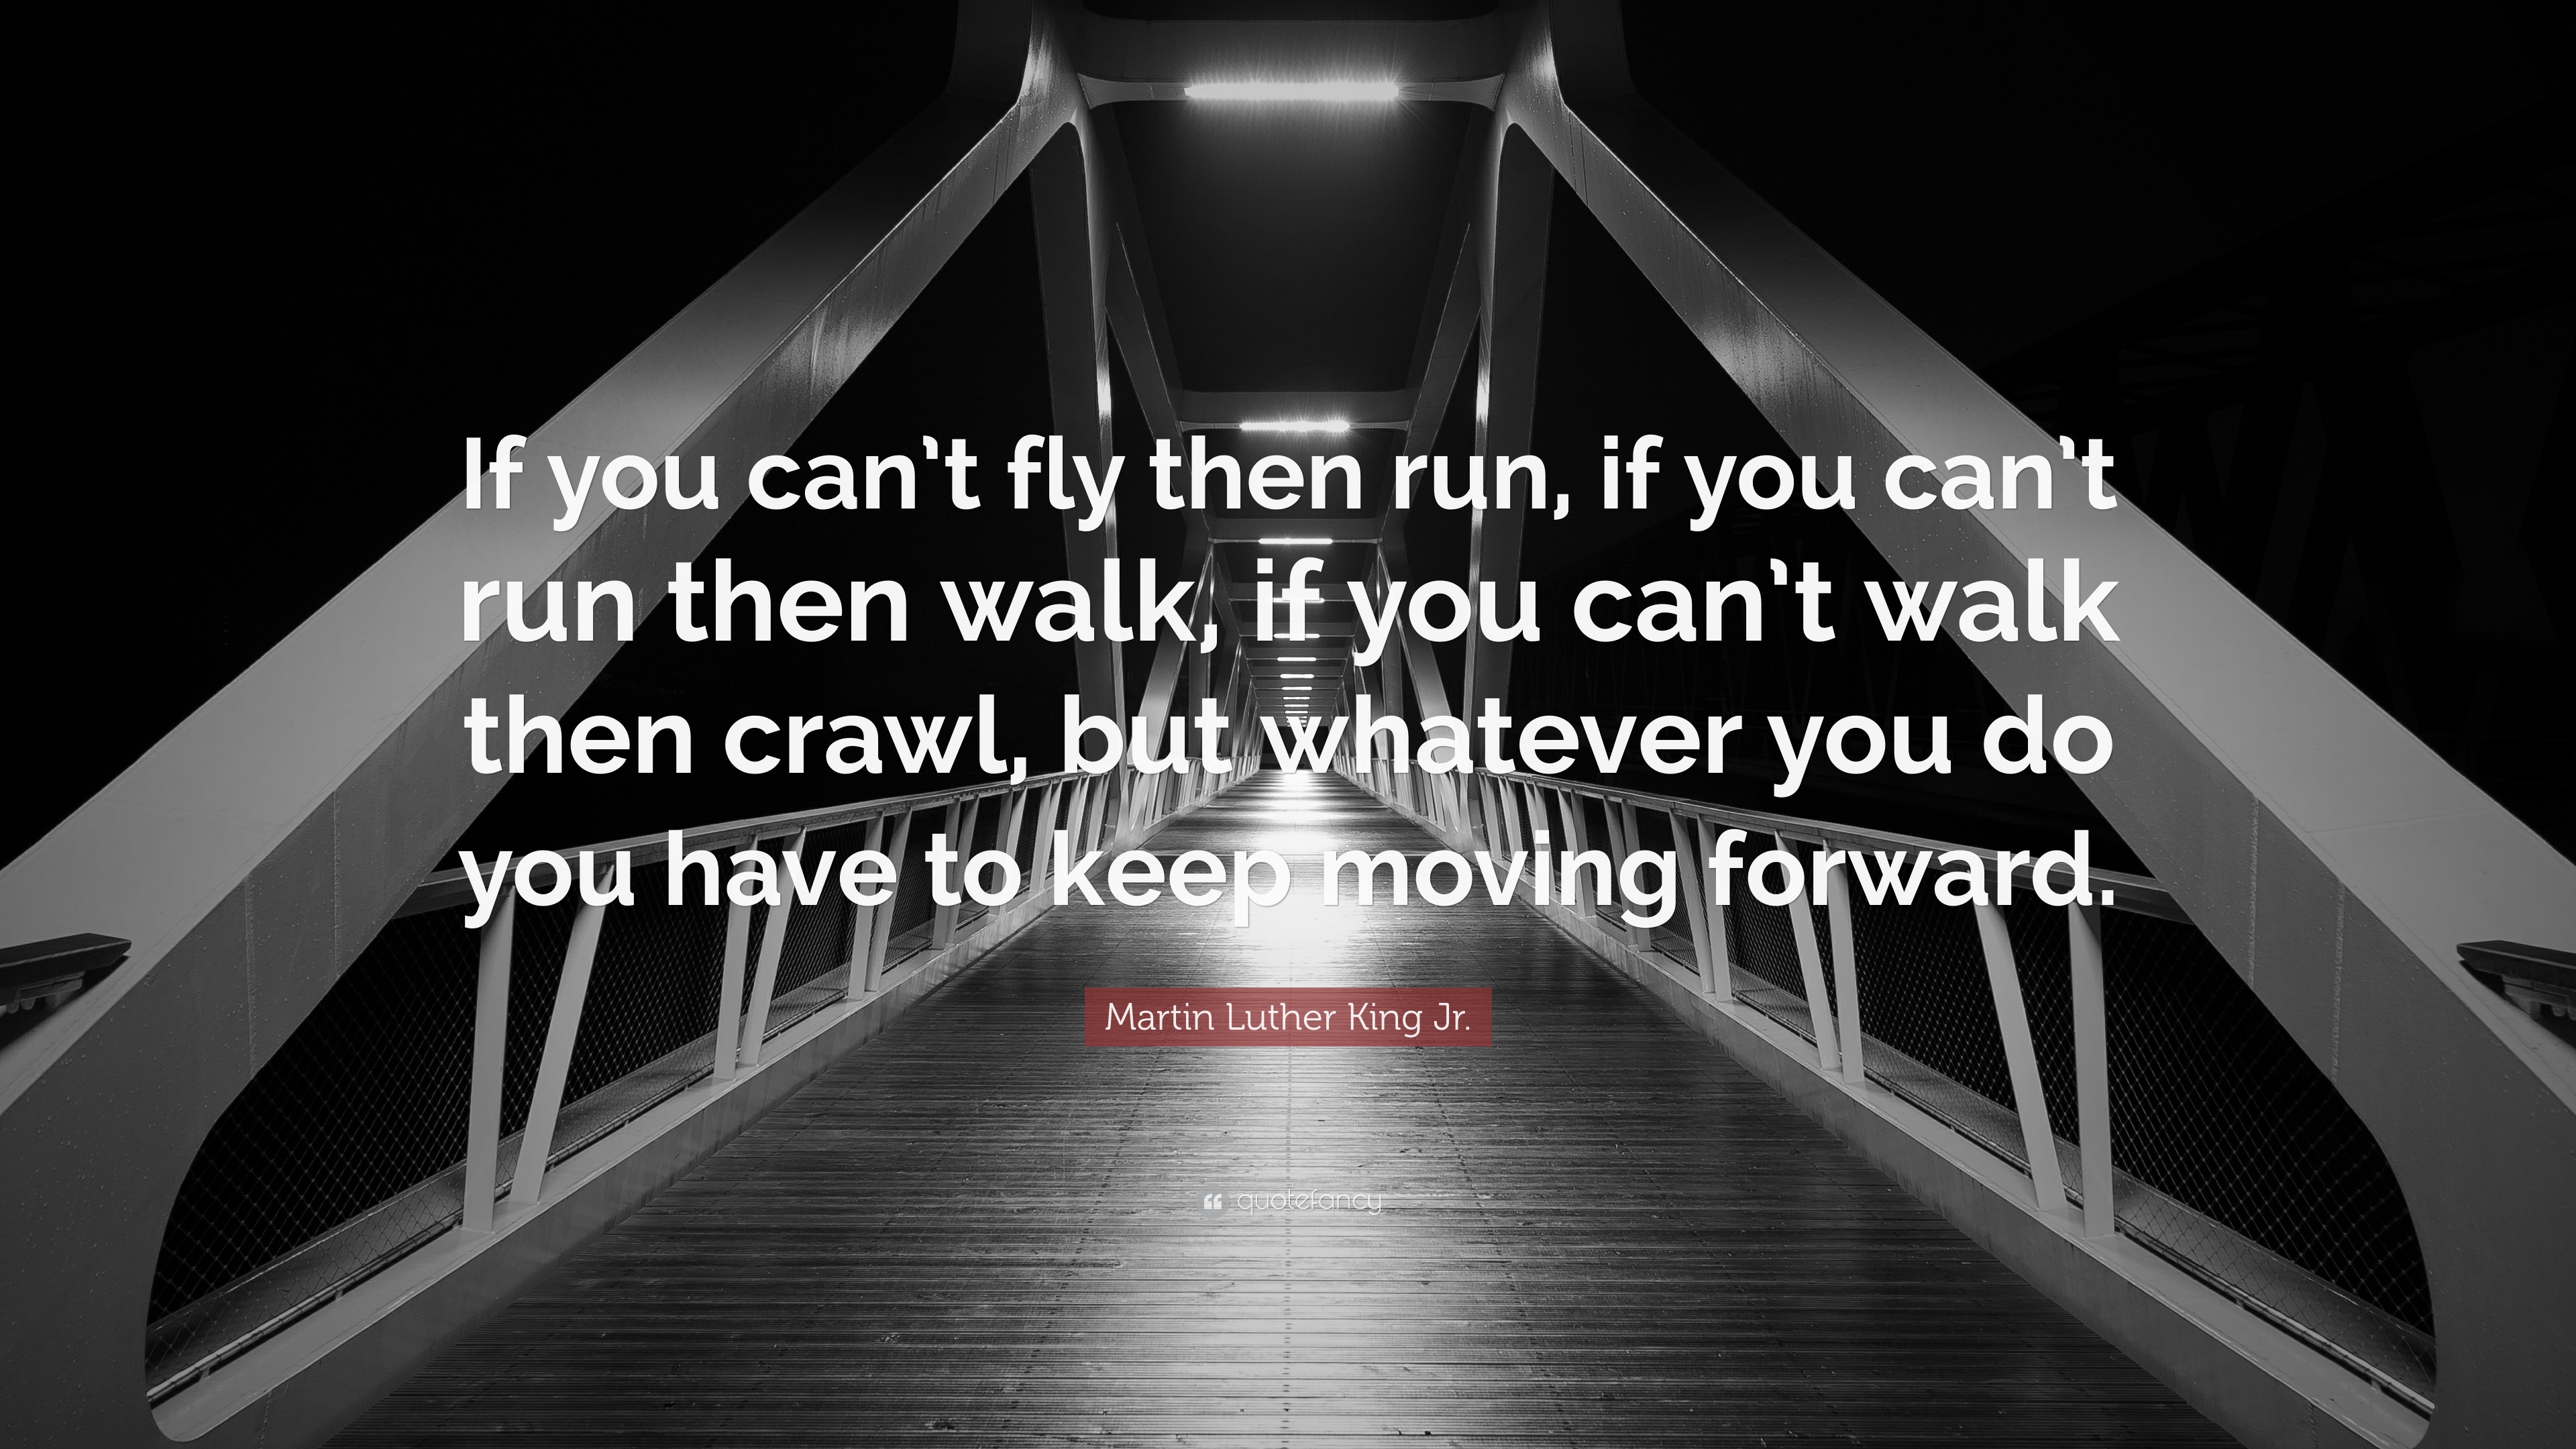 Martin Luther King Jr. Quote: "If you can't fly then run ...